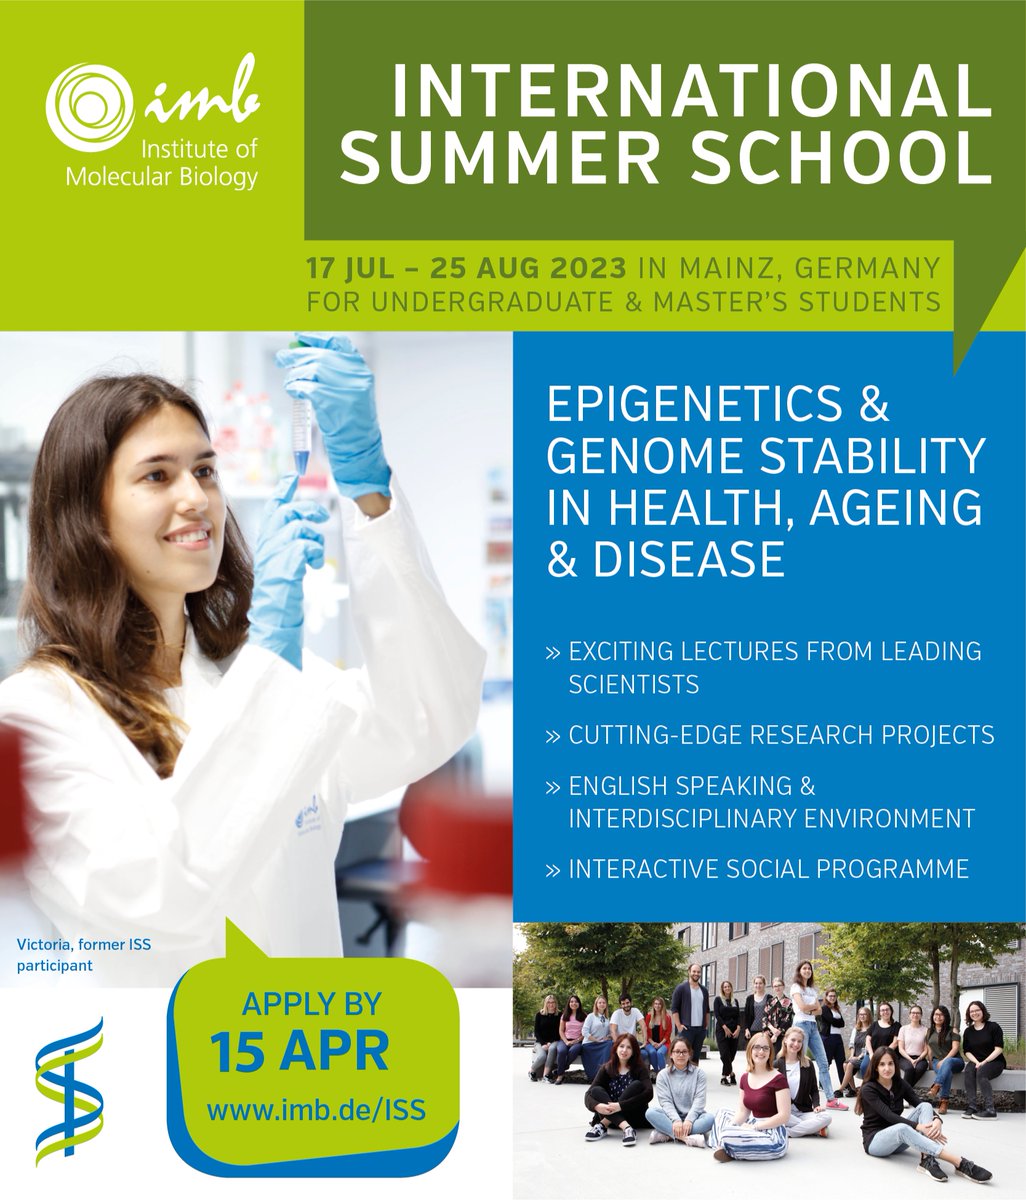 📢Are you a university student interested in life sciences topics such as #Epigenetics #GenomeStability #AgingResearch #RNA & #Bioninformatics? Join our #SummerSchool (17 Jul-25 Aug)!  
Apply by 15 Apr📨imb.de/ISS/apply

#issimbmainz #ResearchInternship #AgeingResearch